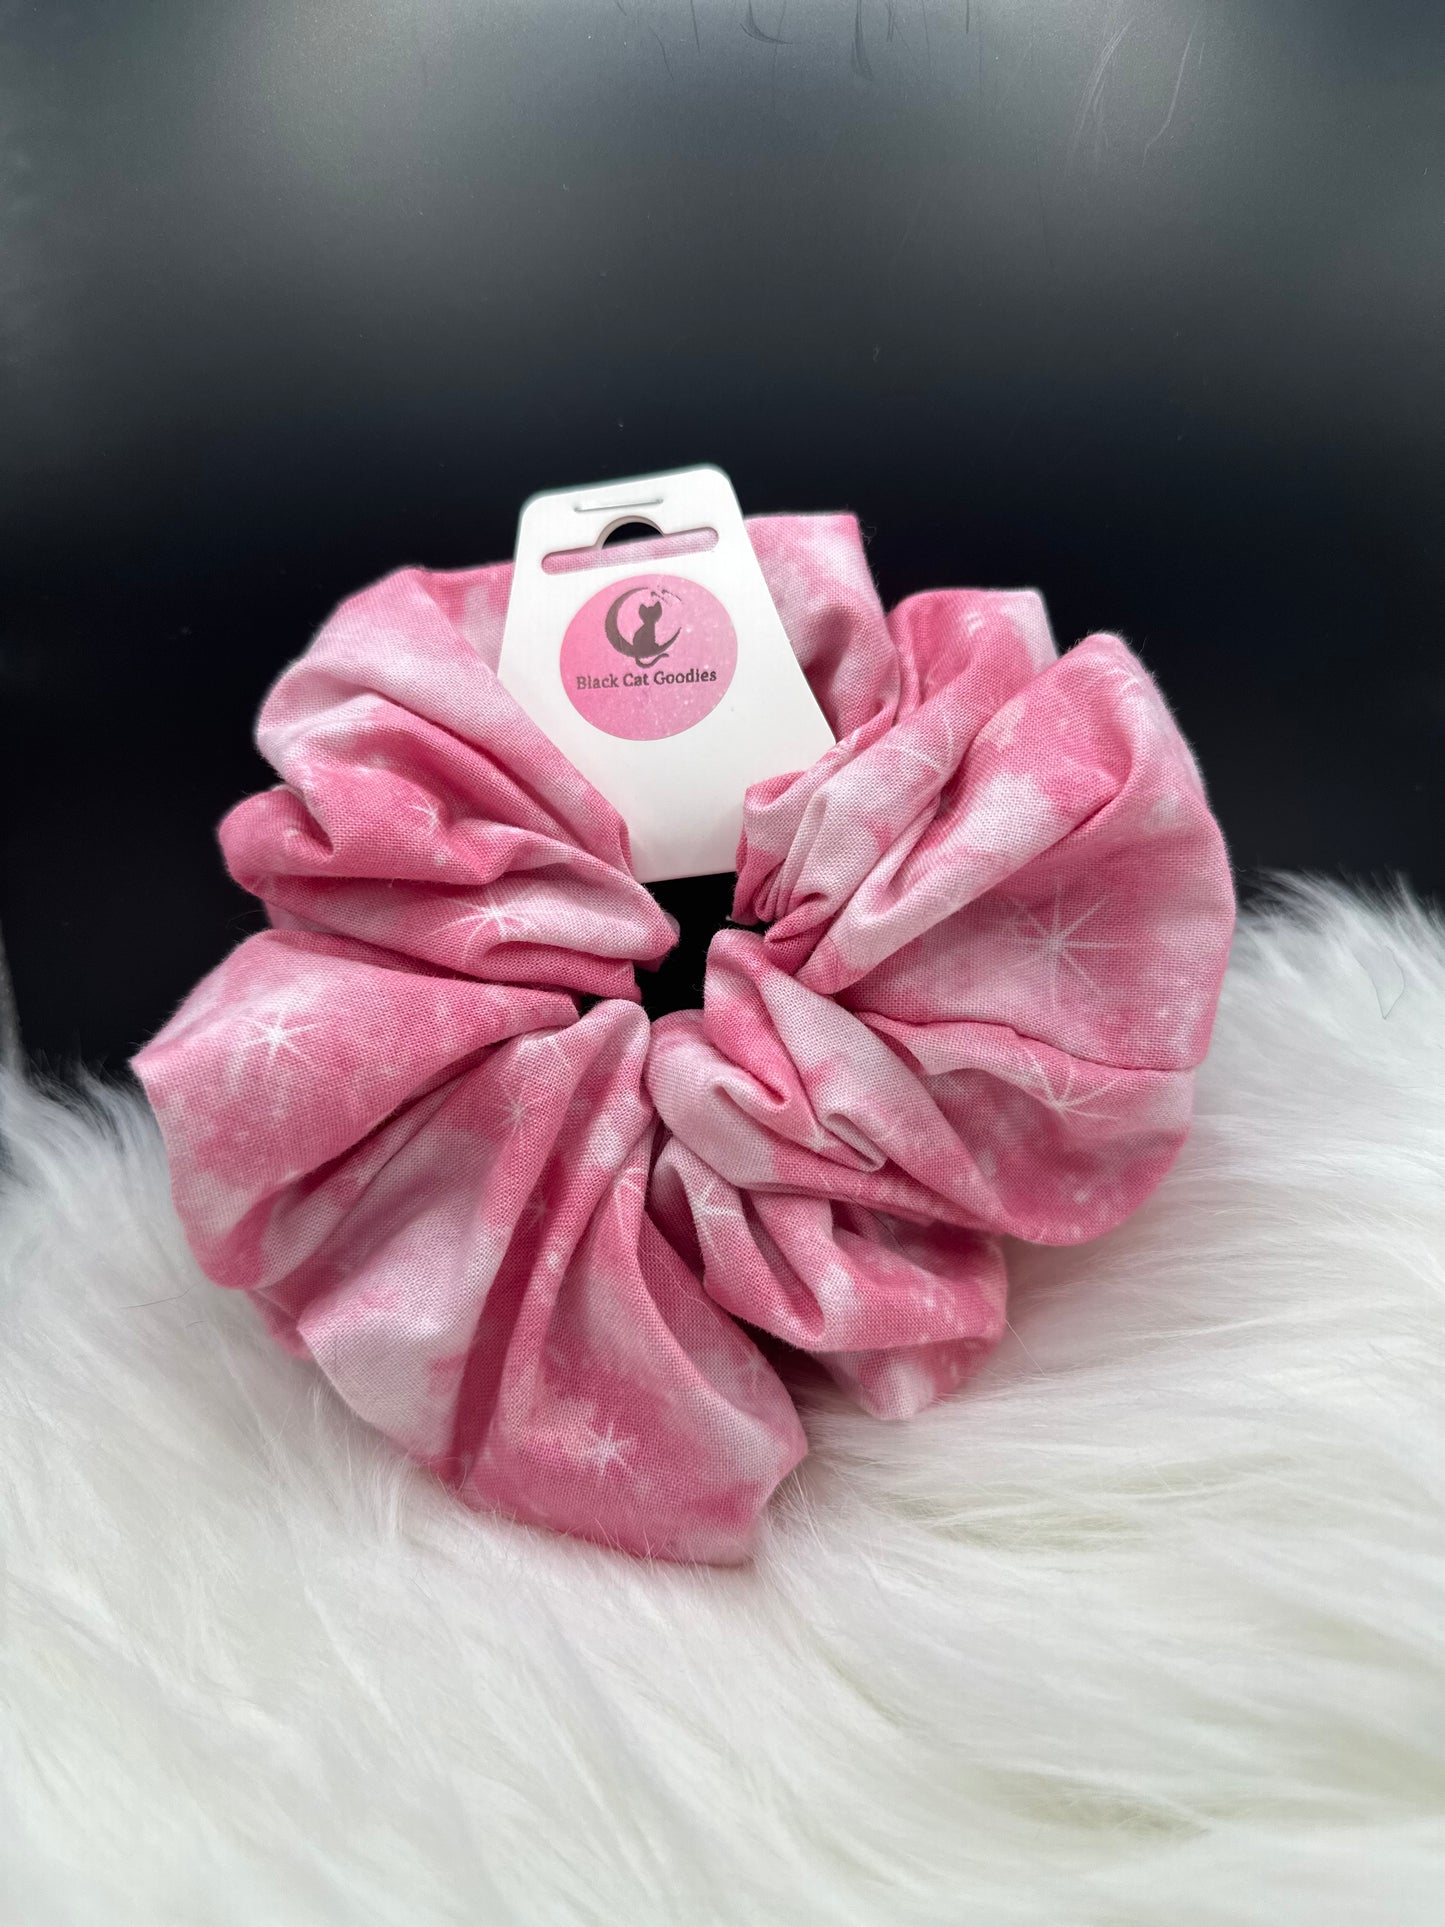 Hair scrunchies for women, hair scrunchies for thick hair, hair scrunchies for thin hair, Silk hair scrunchies, handmade scrunchies, fluffy scrunchie, pink and white scrunchie